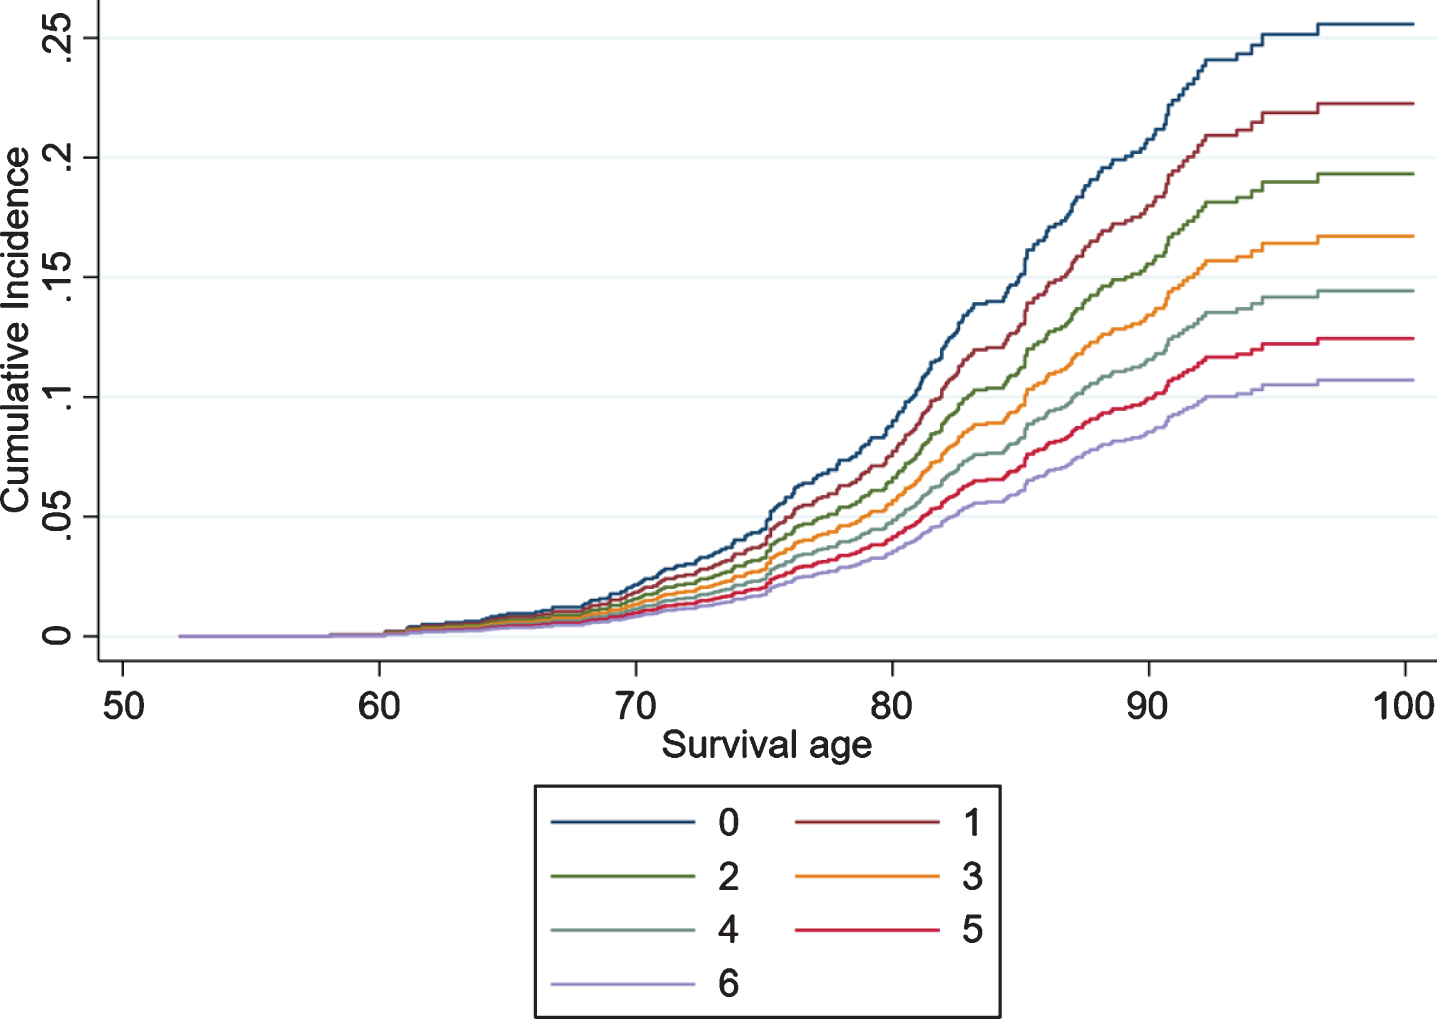 Competing risk regressions by the number of intellectual activities performed by married individuals aged 50+ in the English Longitudinal Study of Ageing.